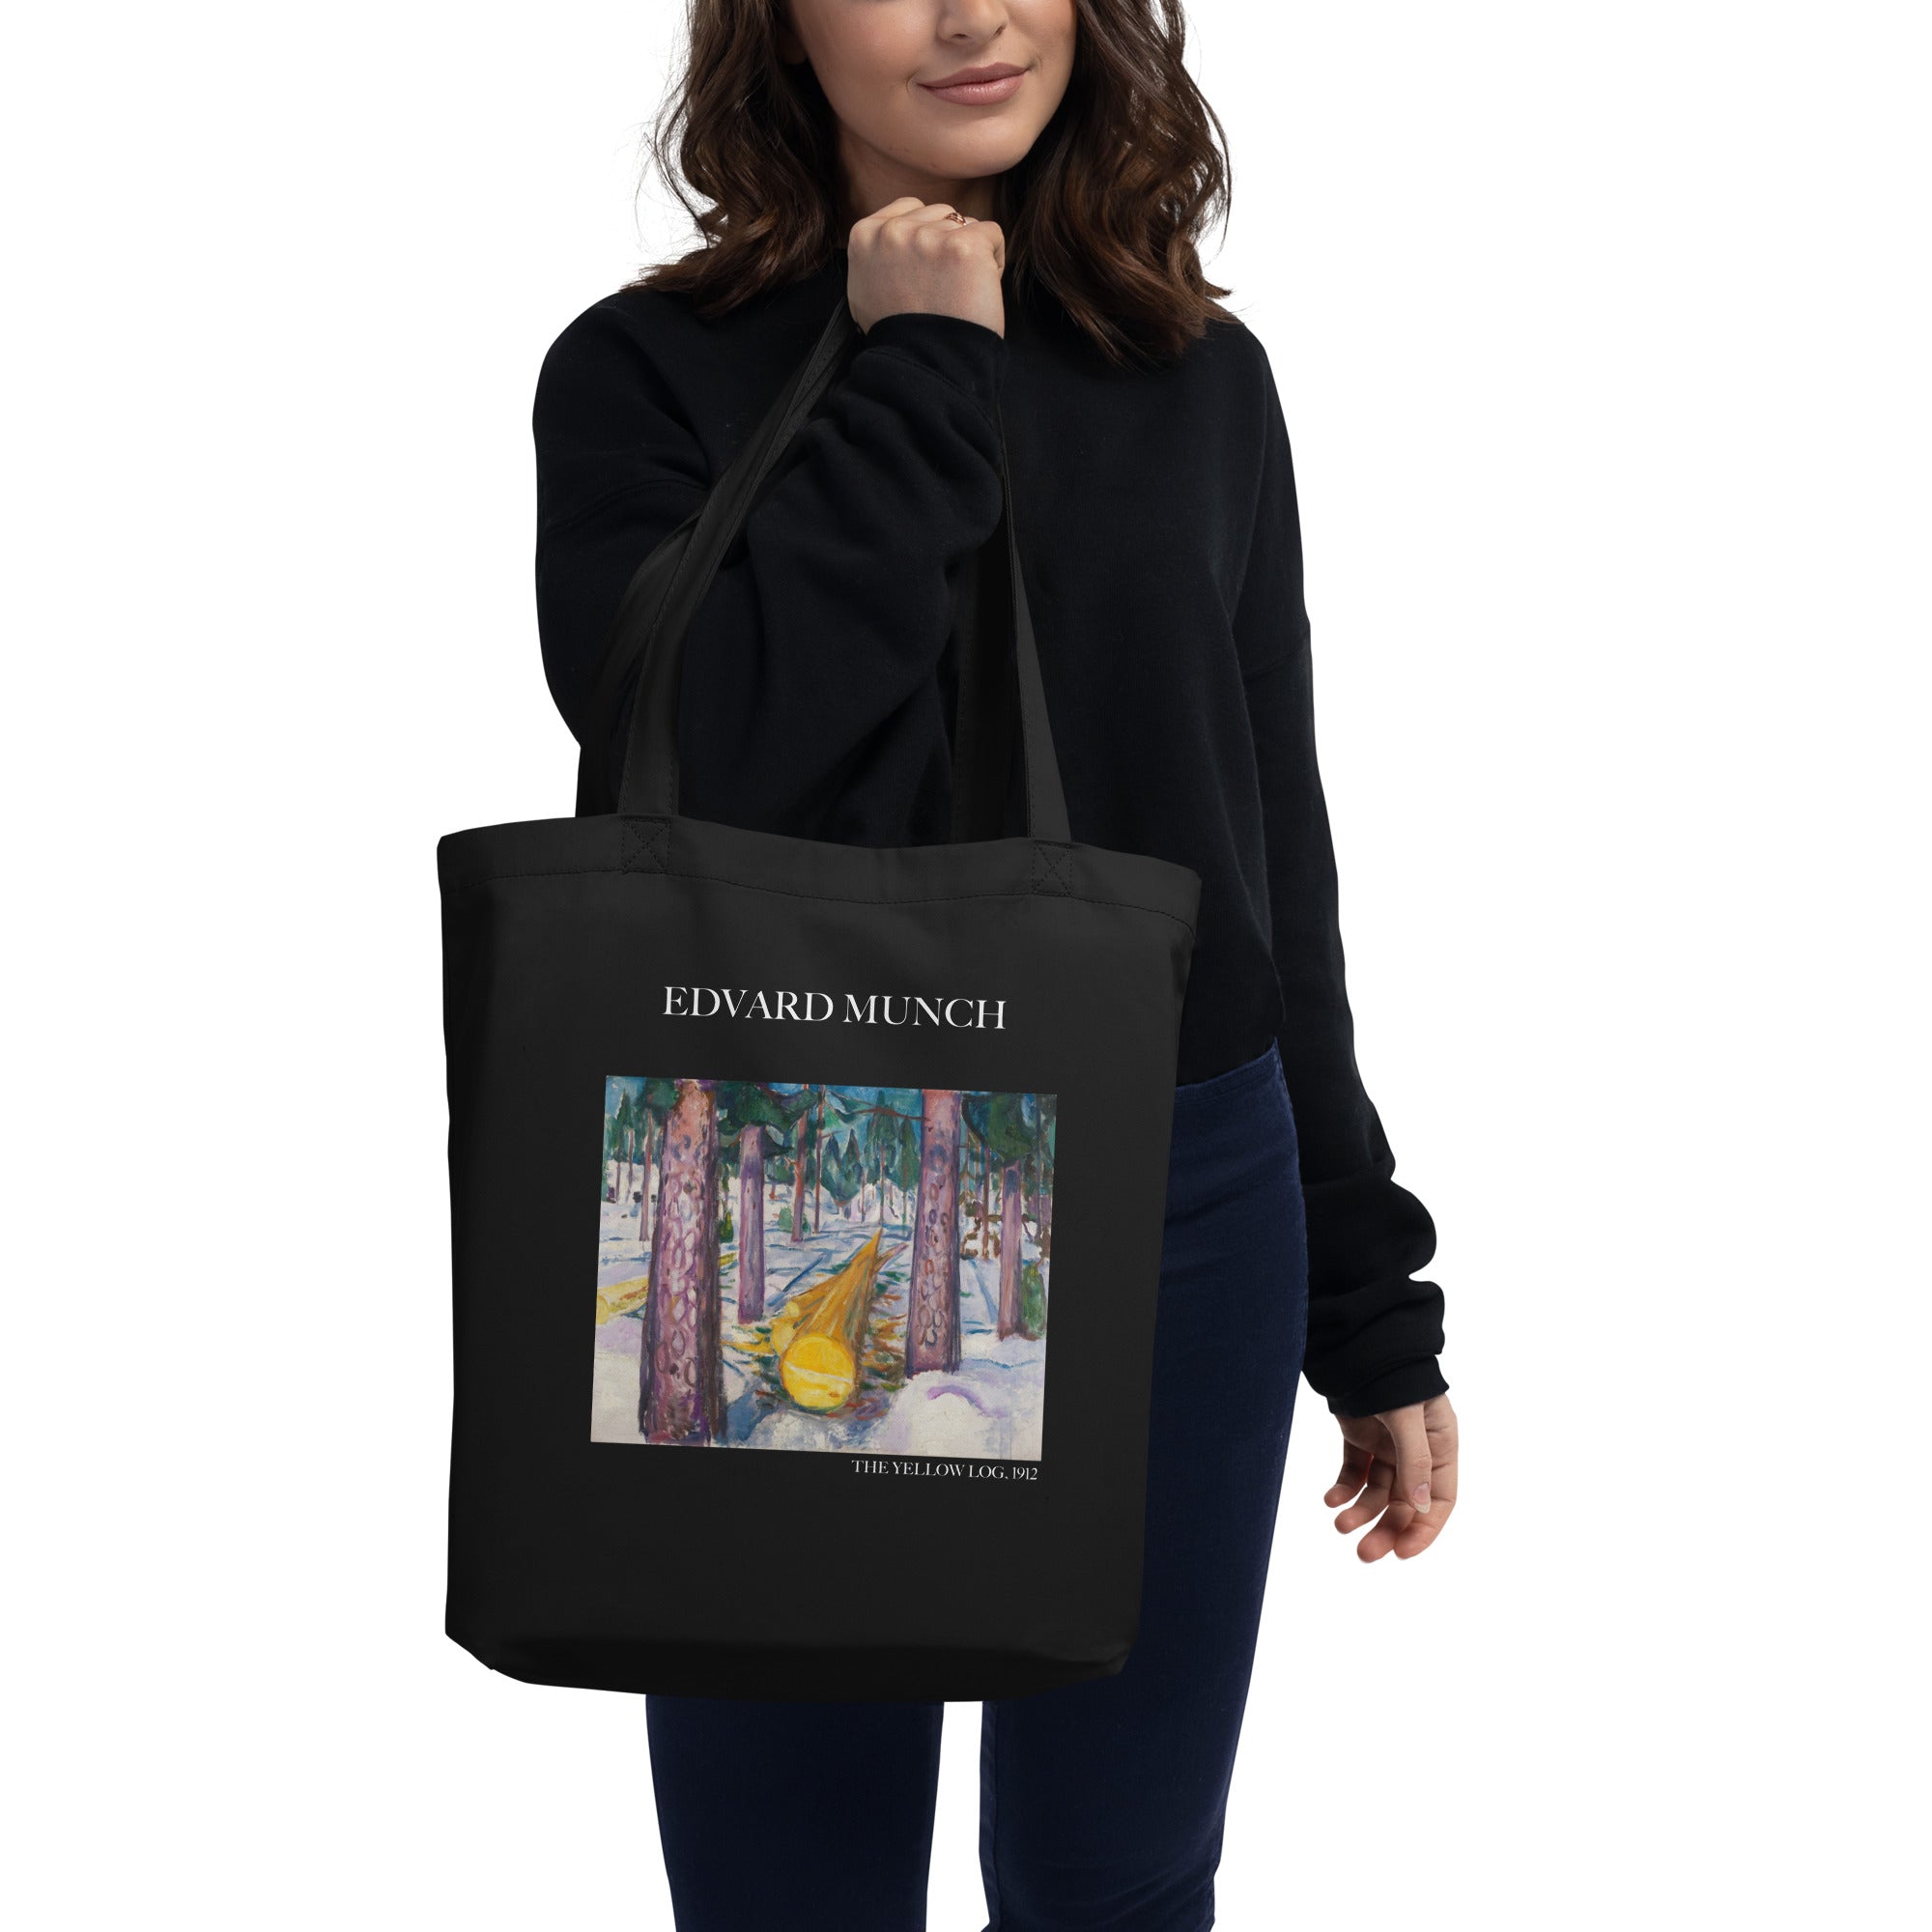 Edvard Munch 'The Yellow Log' Famous Painting Totebag | Eco Friendly Art Tote Bag